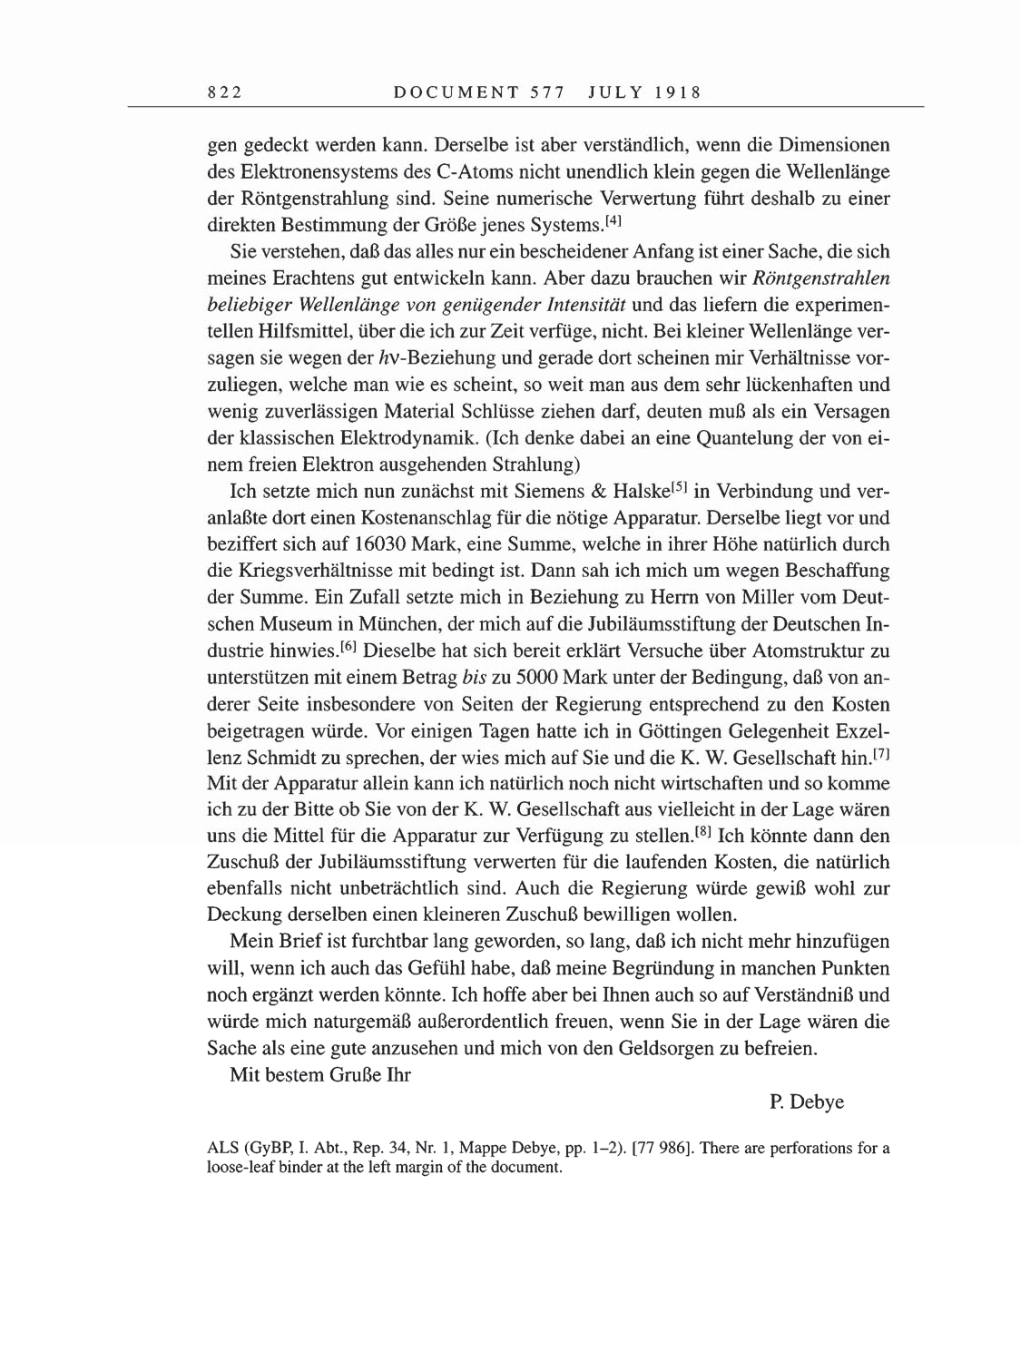 Volume 8, Part B: The Berlin Years: Correspondence 1918 page 822